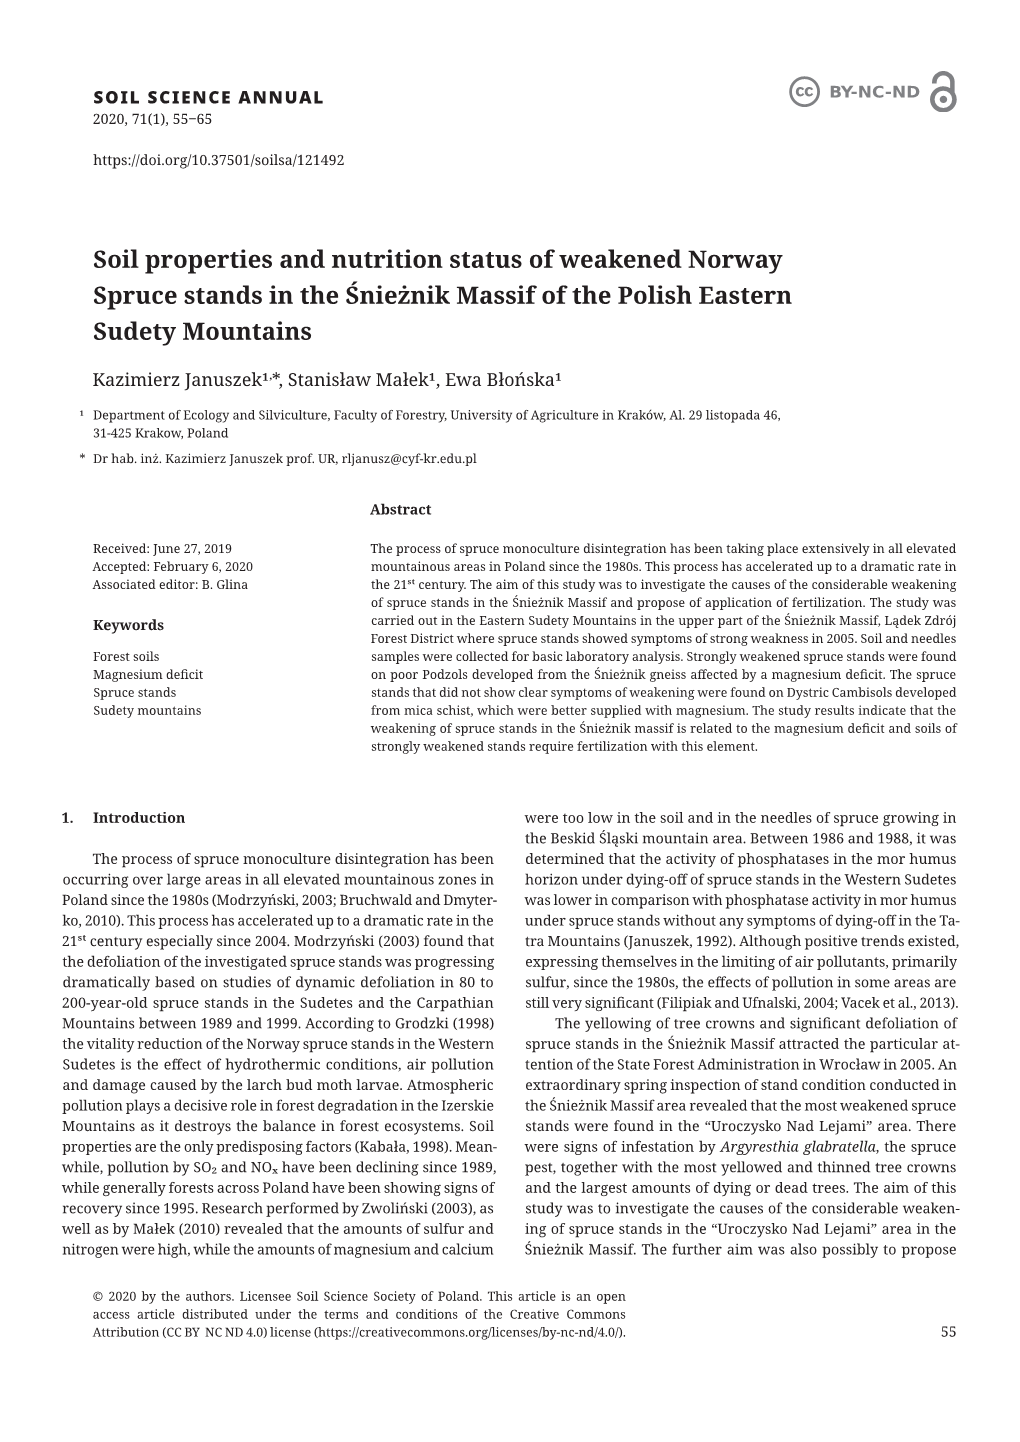 Soil Properties and Nutrition Status of Weakened Norway Spruce Stands in the Śnieżnik Massif of the Polish Eastern Sudety Mountains